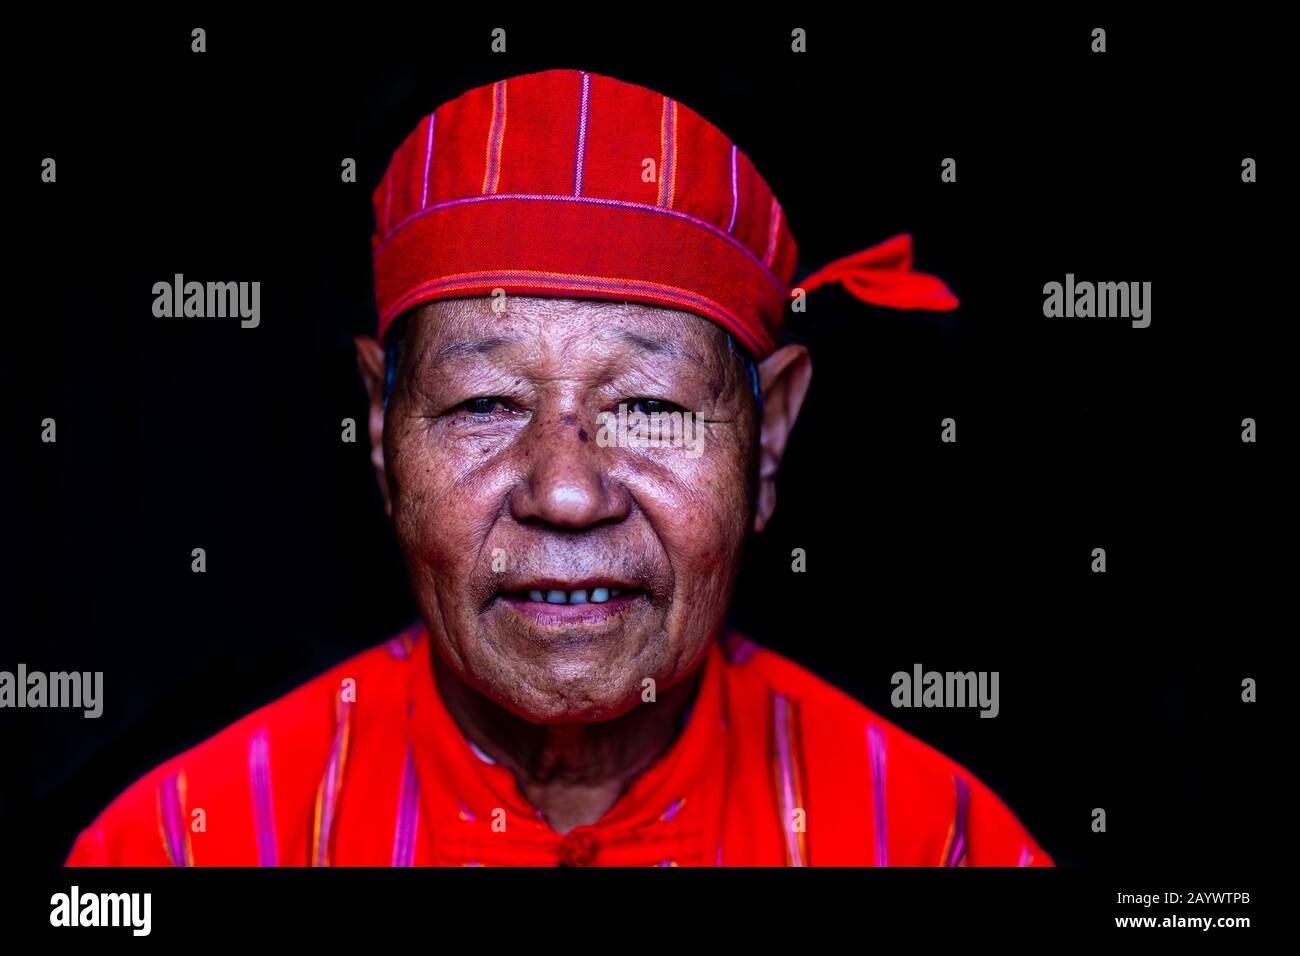 A Portrait Of A Man From The Kayah Ethnic Group In Traditional Costume, Hta Nee La Leh Village, Loikaw, Kayah State, Myanmar. Stock Photo